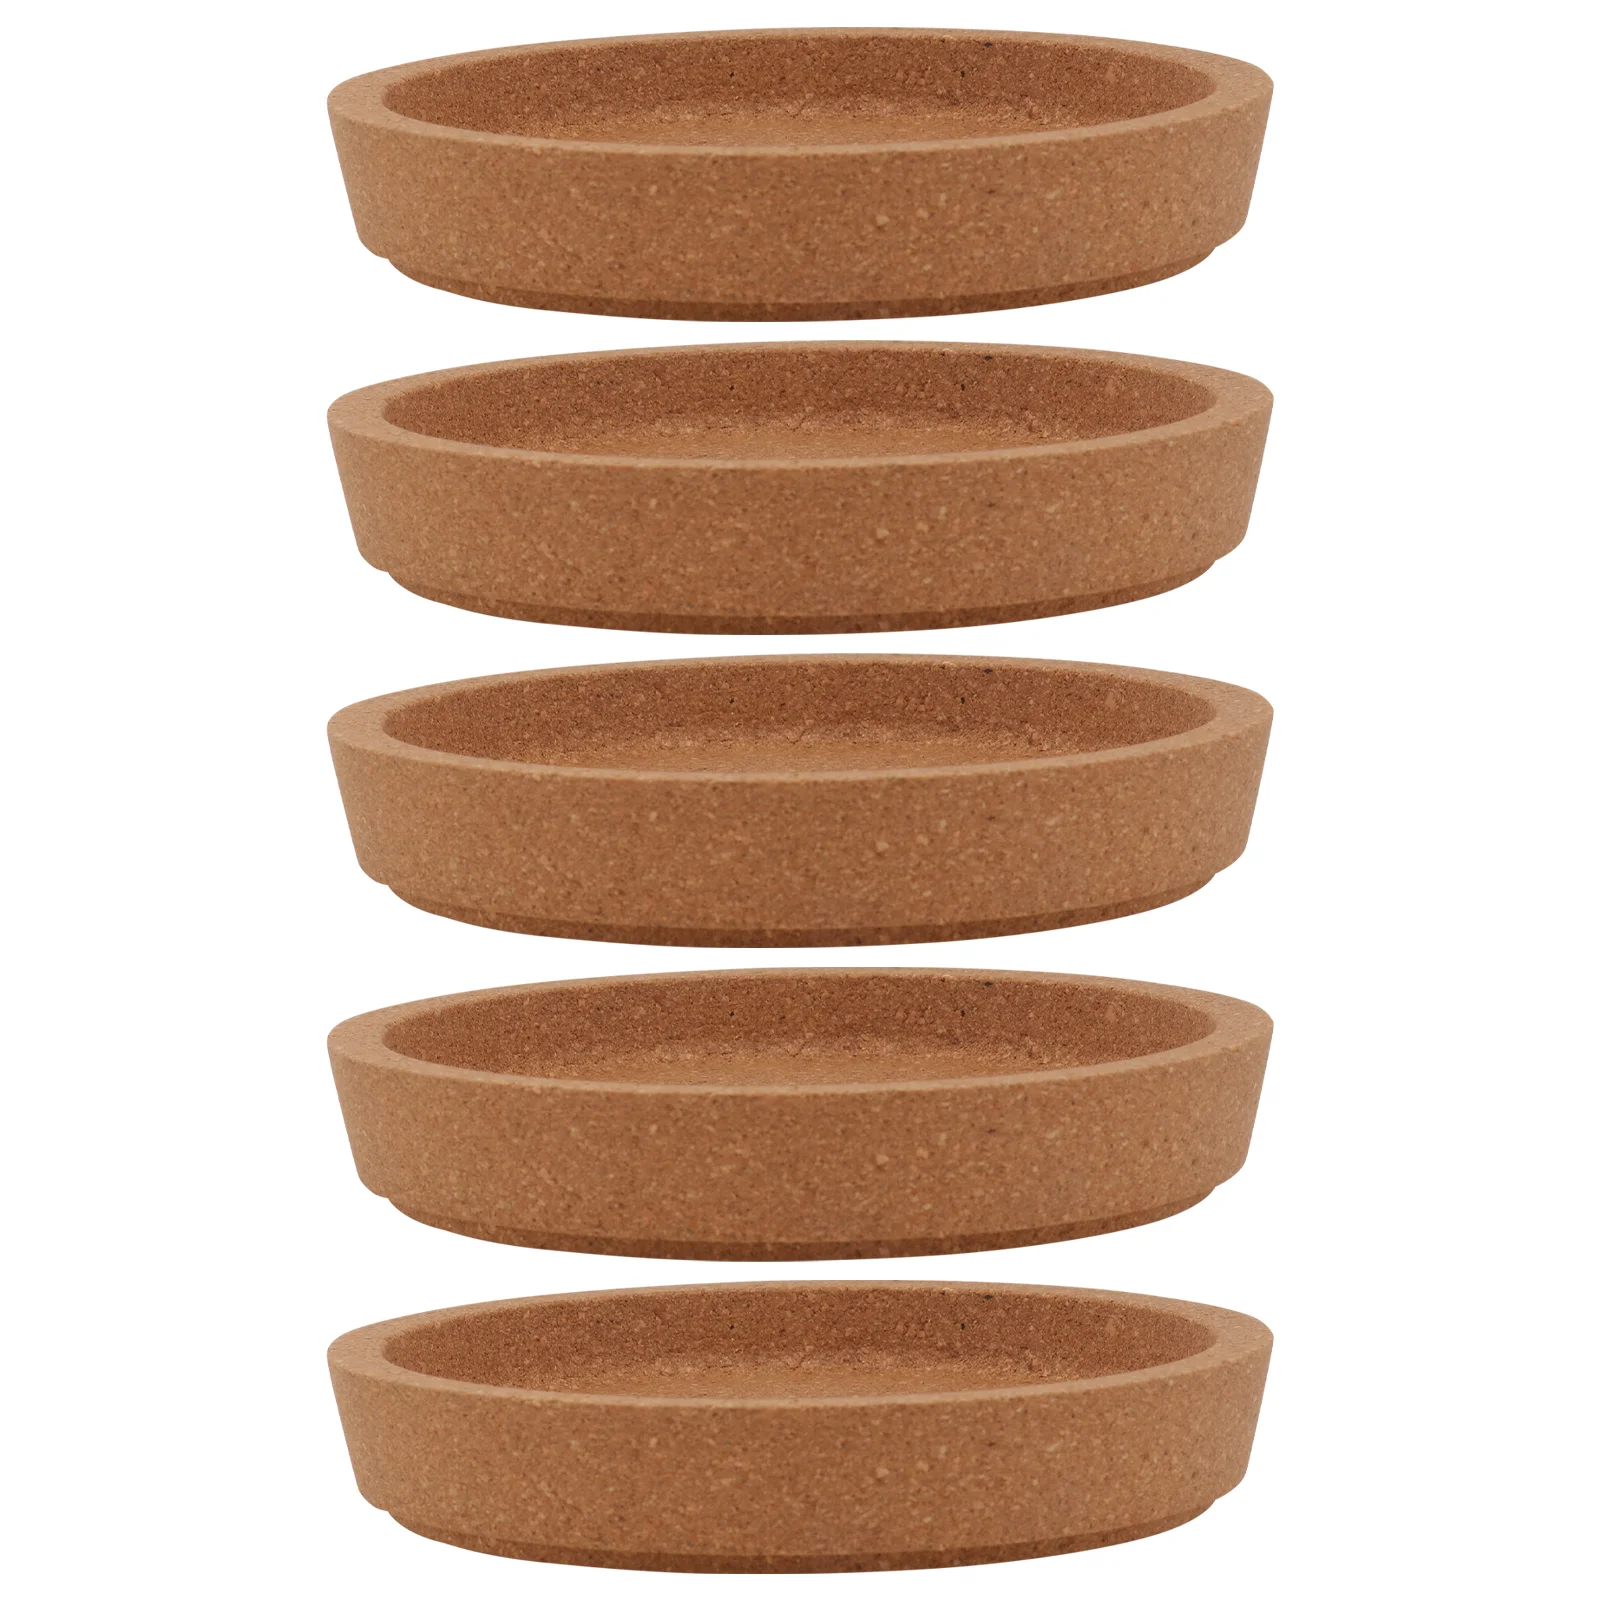 

Coasters Cup Coaster Mat Cork Wood Drink Round Table Natural Mug Heat Resistant Absorbent Placemats Wooden Teacup Mugs Placemat